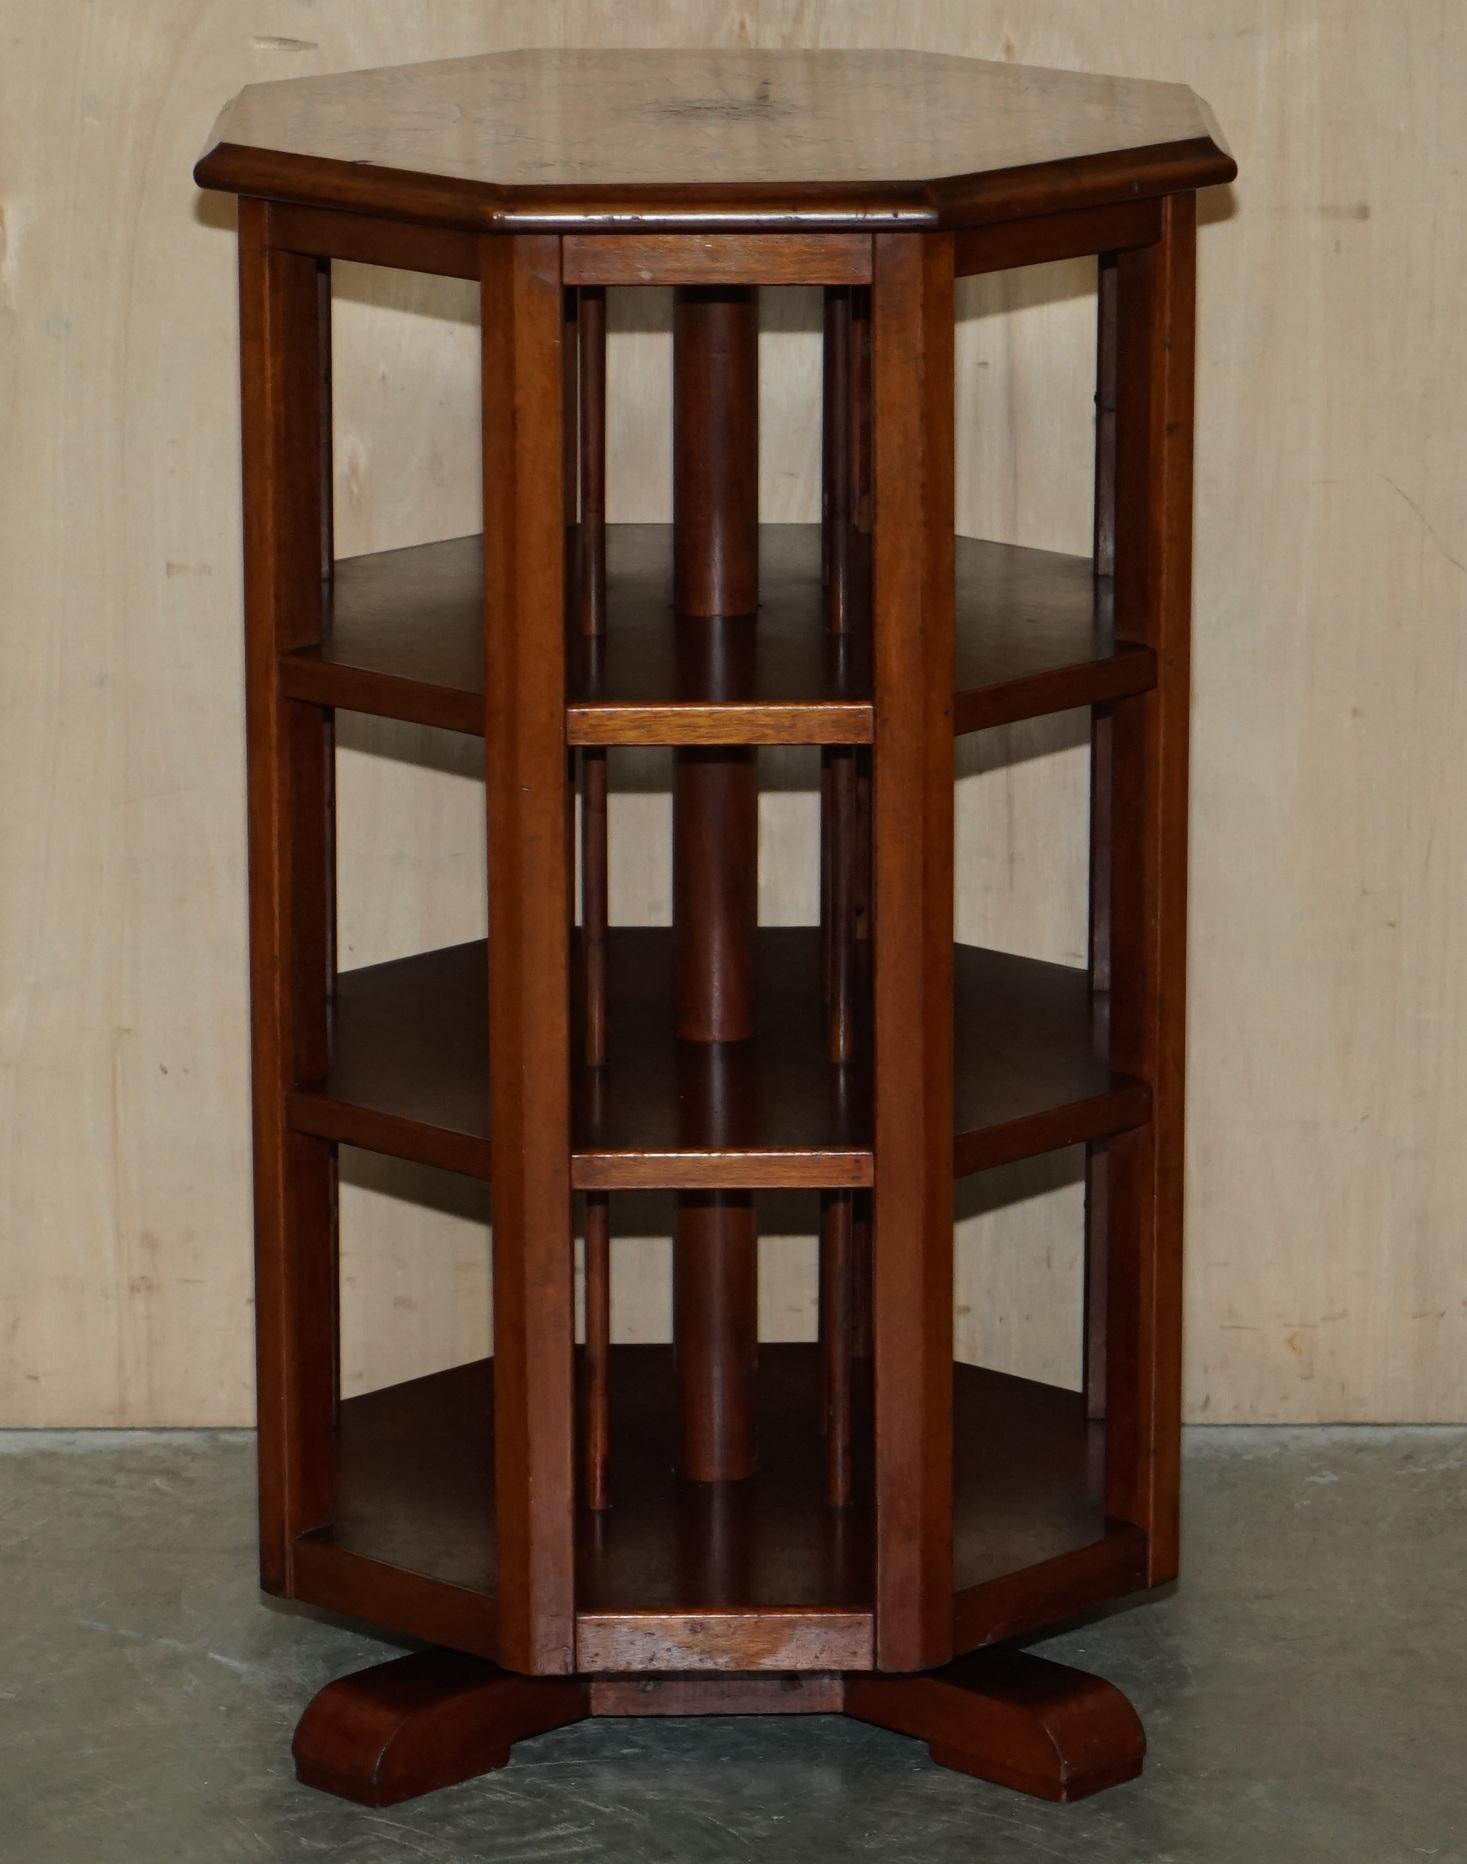 Stunning Beautifully Inlaid Octagonal Revolving Bookcase Book Table Must See Pic For Sale 6